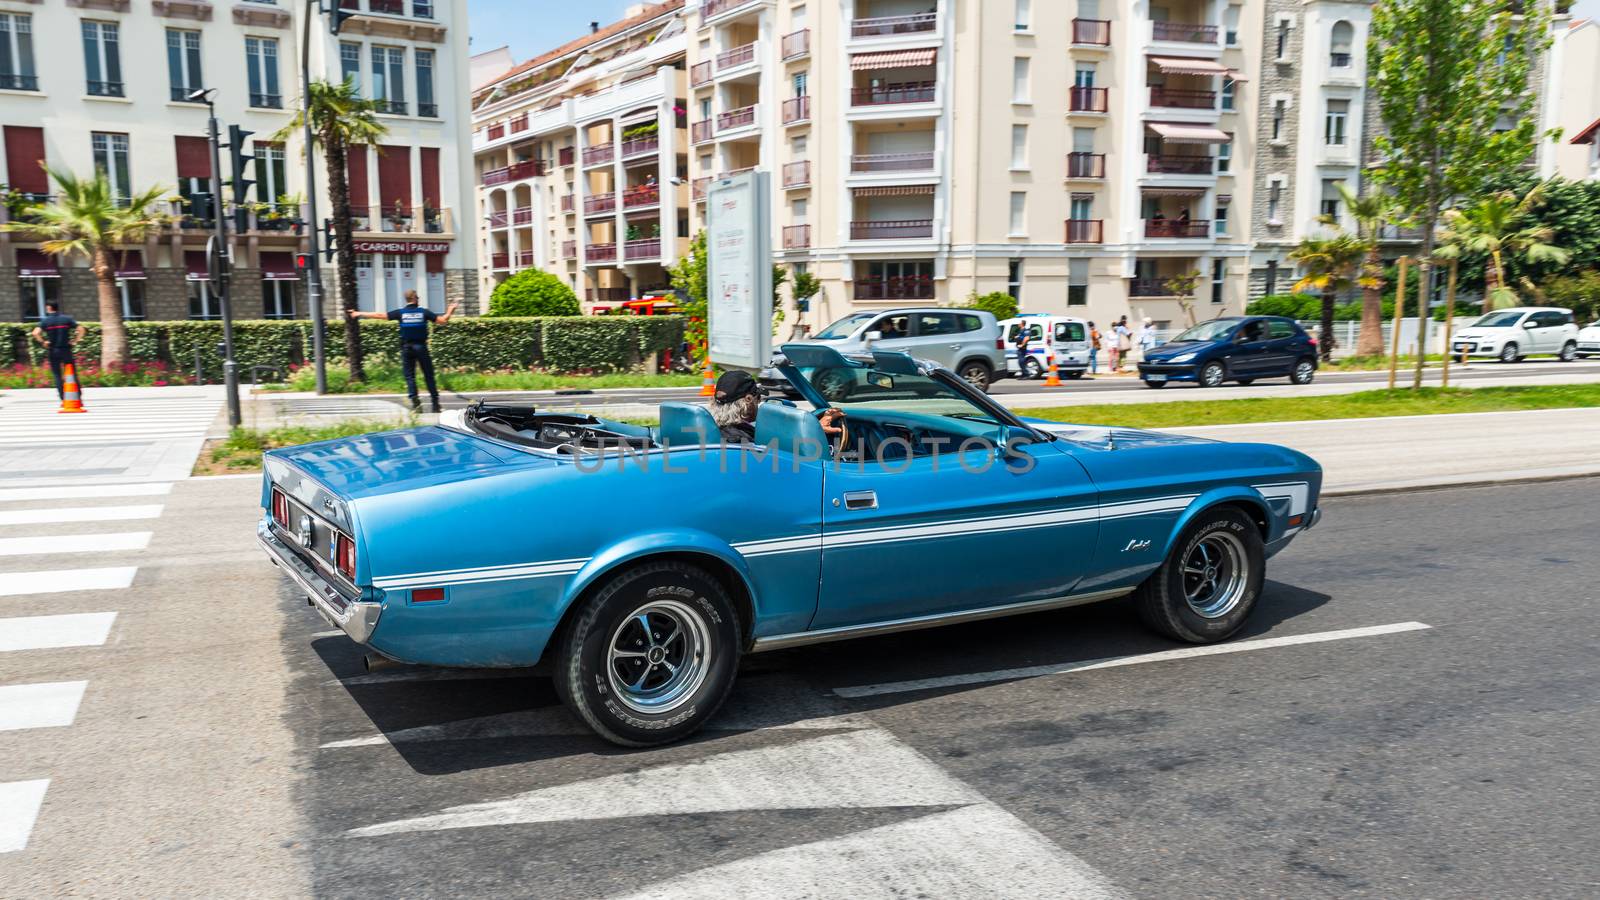 BAYONNE, FRANCE - CIRCA MAY 2020: A blue vintage Ford Mustang Convertible in the town centre.